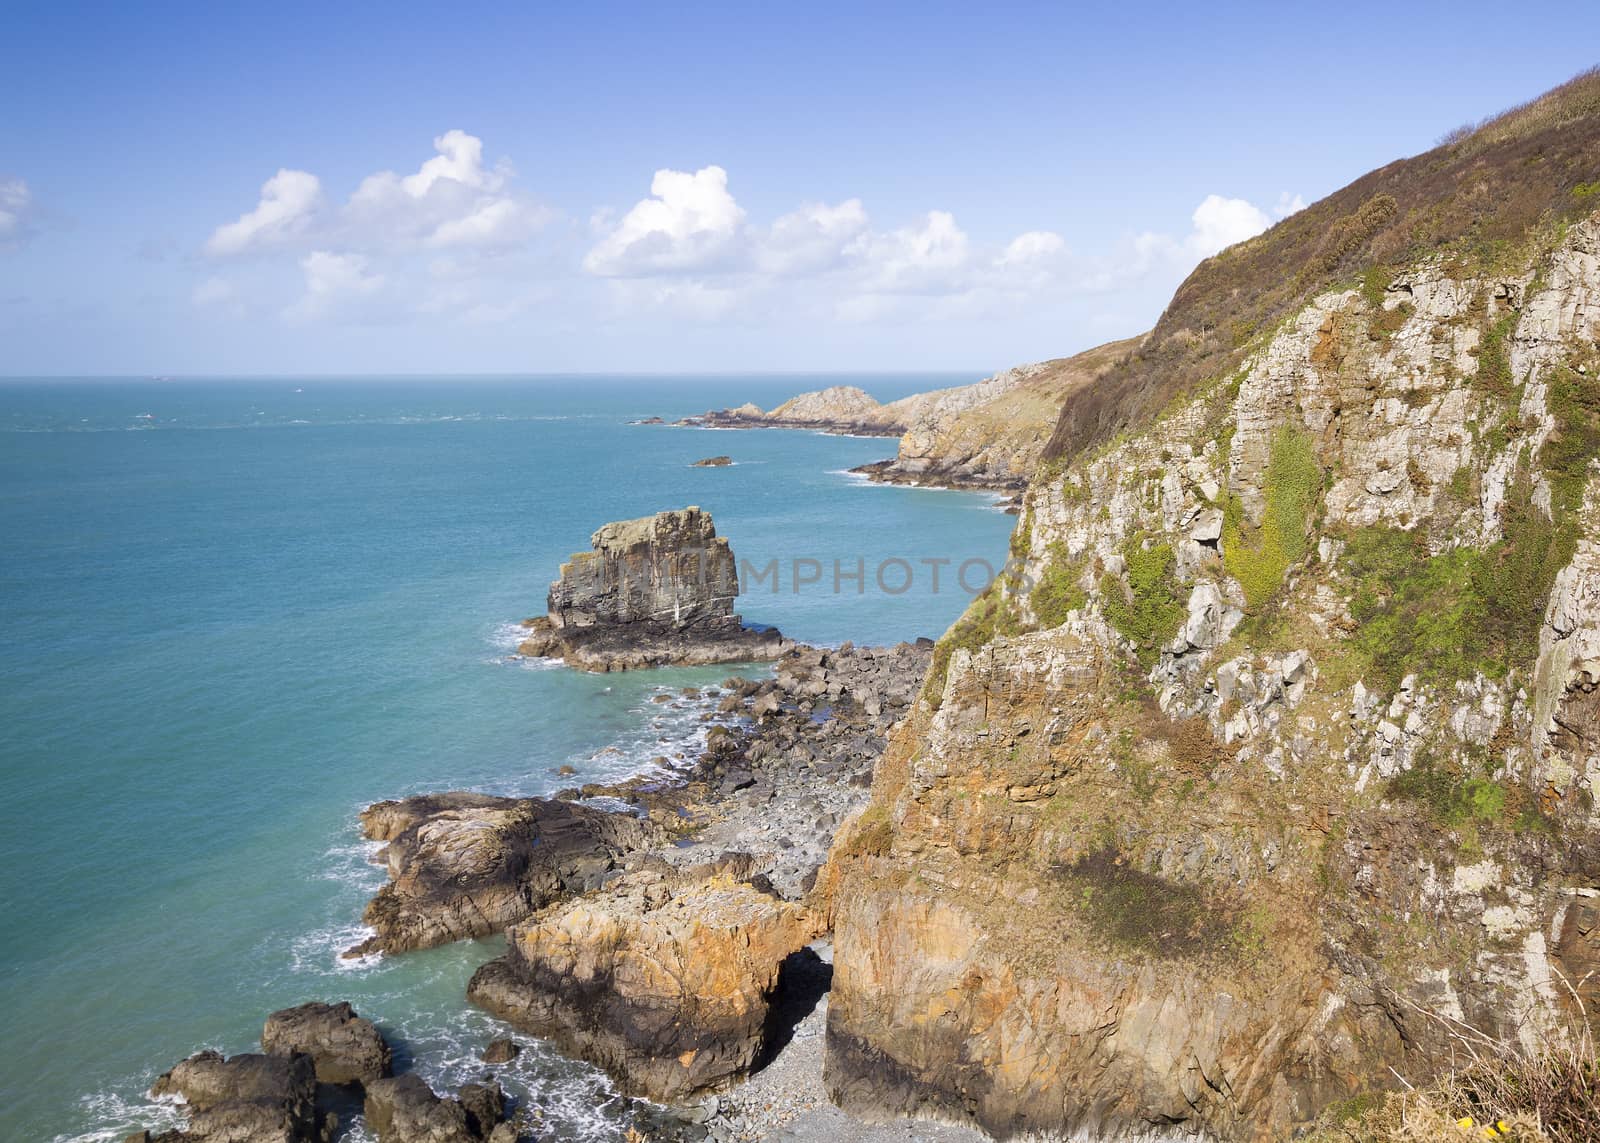 Coastal scene on Sark  looking out over the English Channel